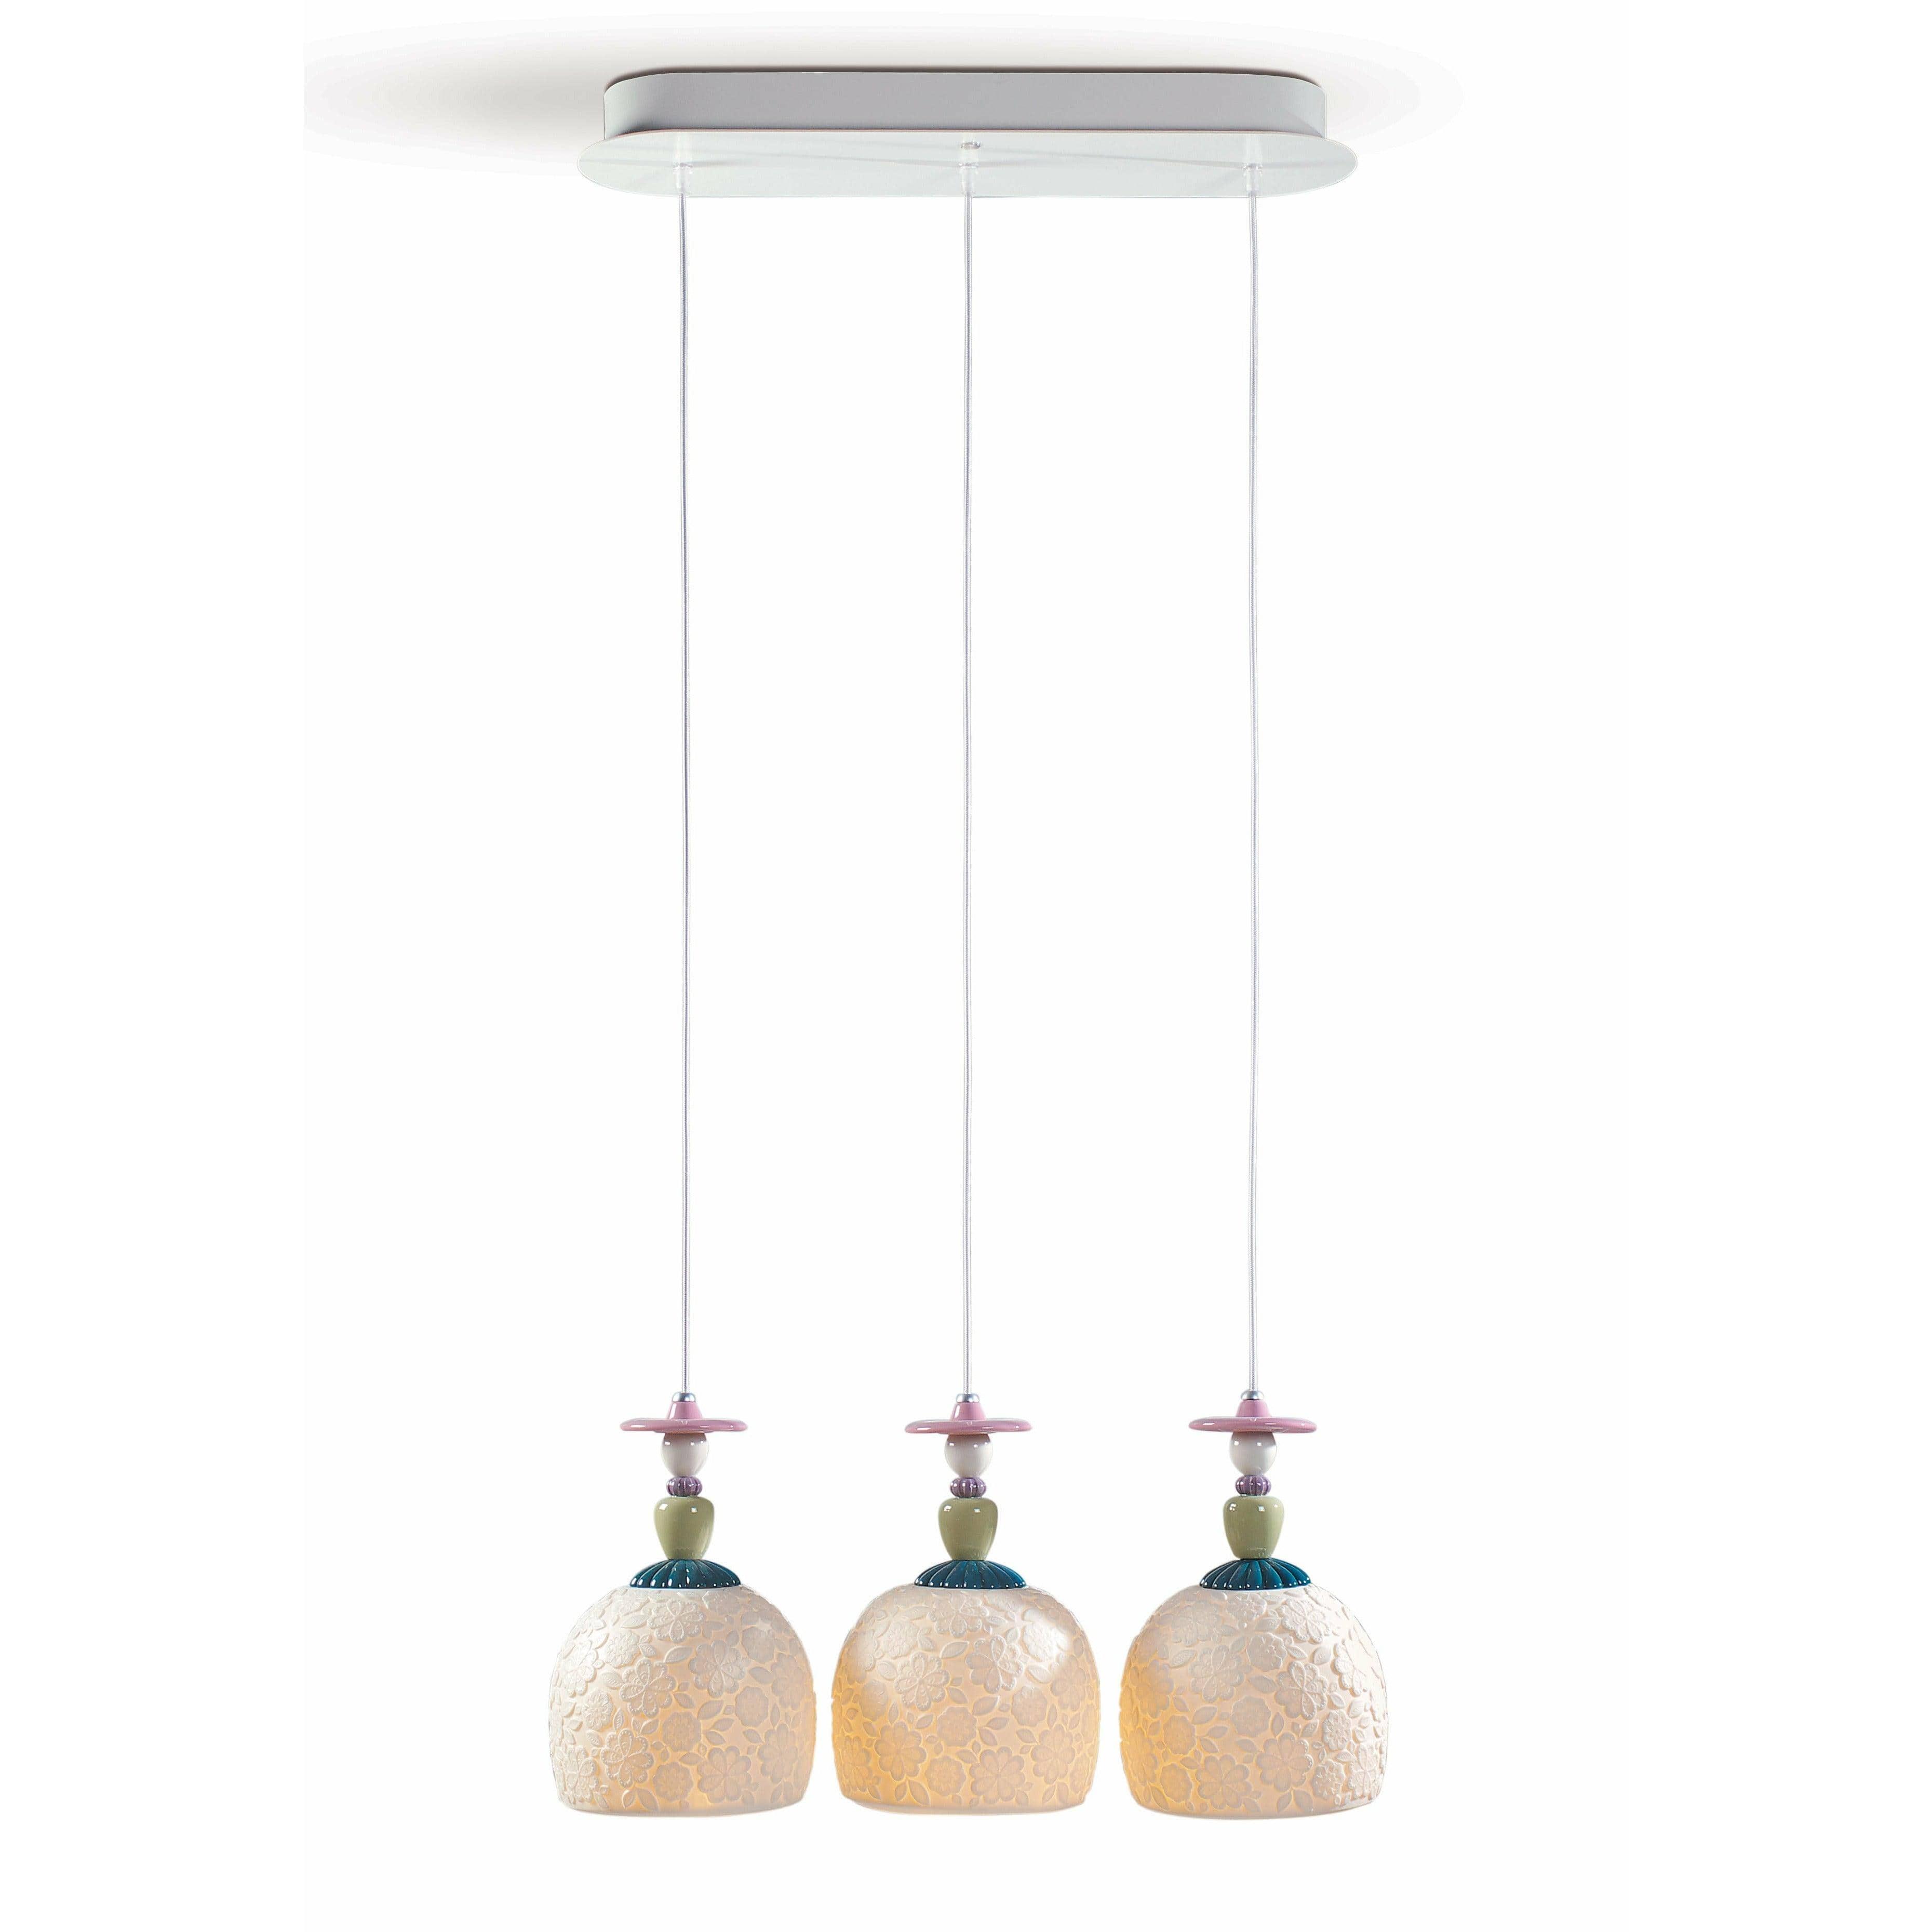 Lladro - Mademoiselle Lineal Canopy 3 Lights Gazing at The Ocean Ceiling Lamp - 01023561 | Montreal Lighting & Hardware